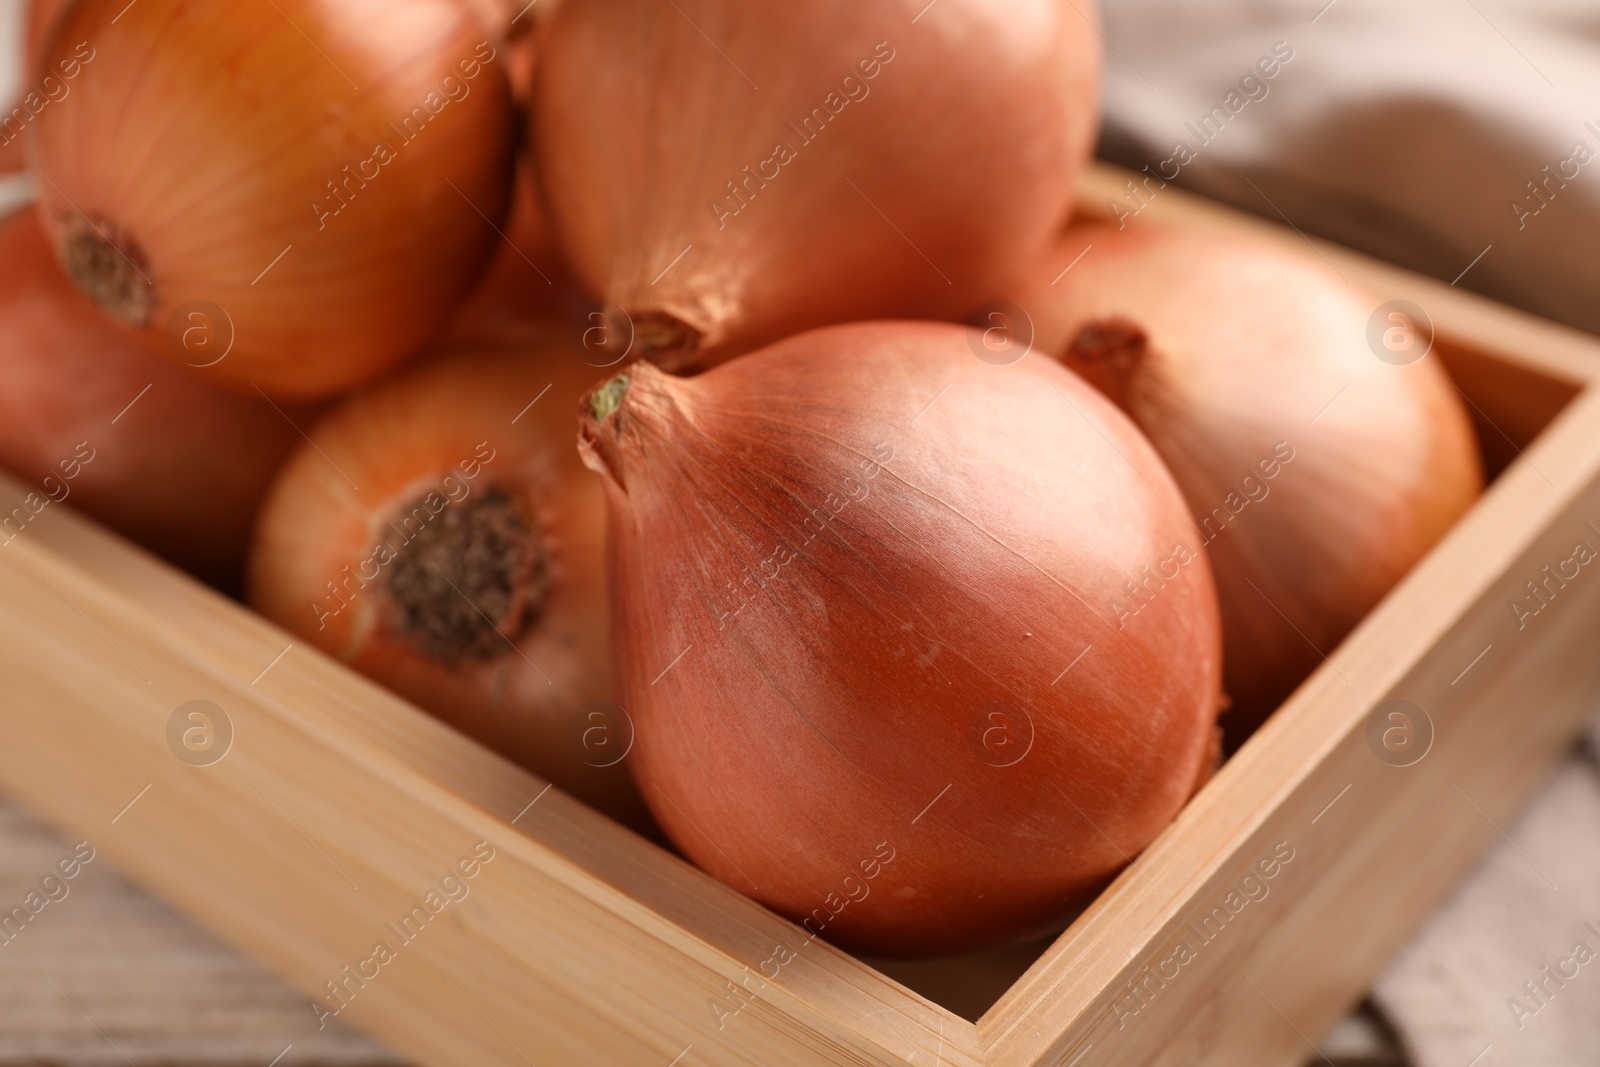 Photo of Crate with ripe onions on white wooden table, closeup